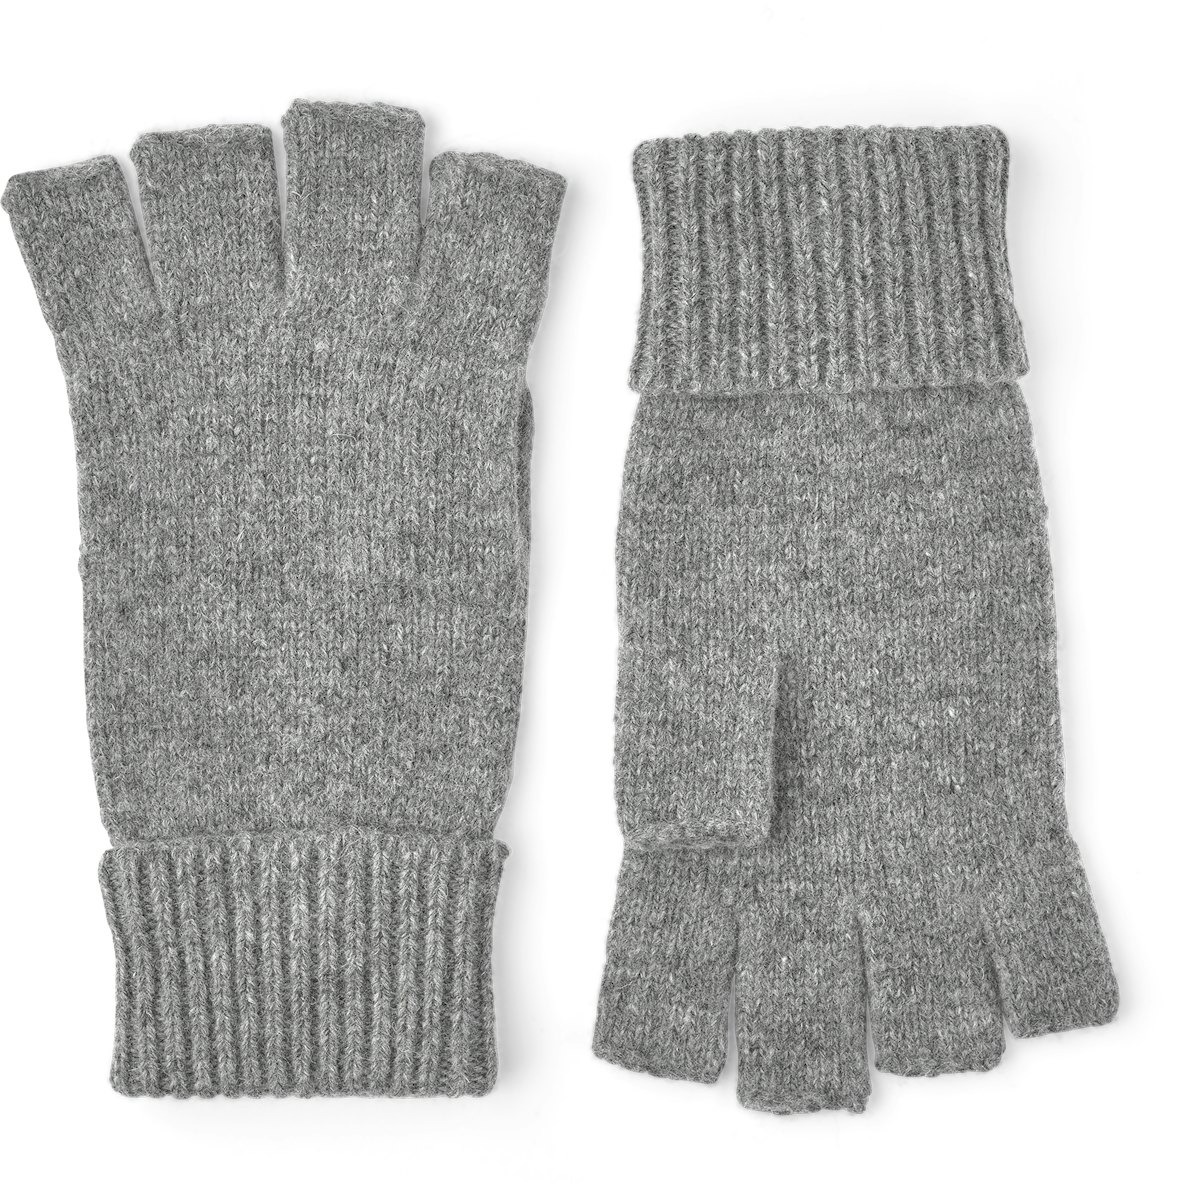 Premium Photo  Knitting gloves made of gray wool. top view.